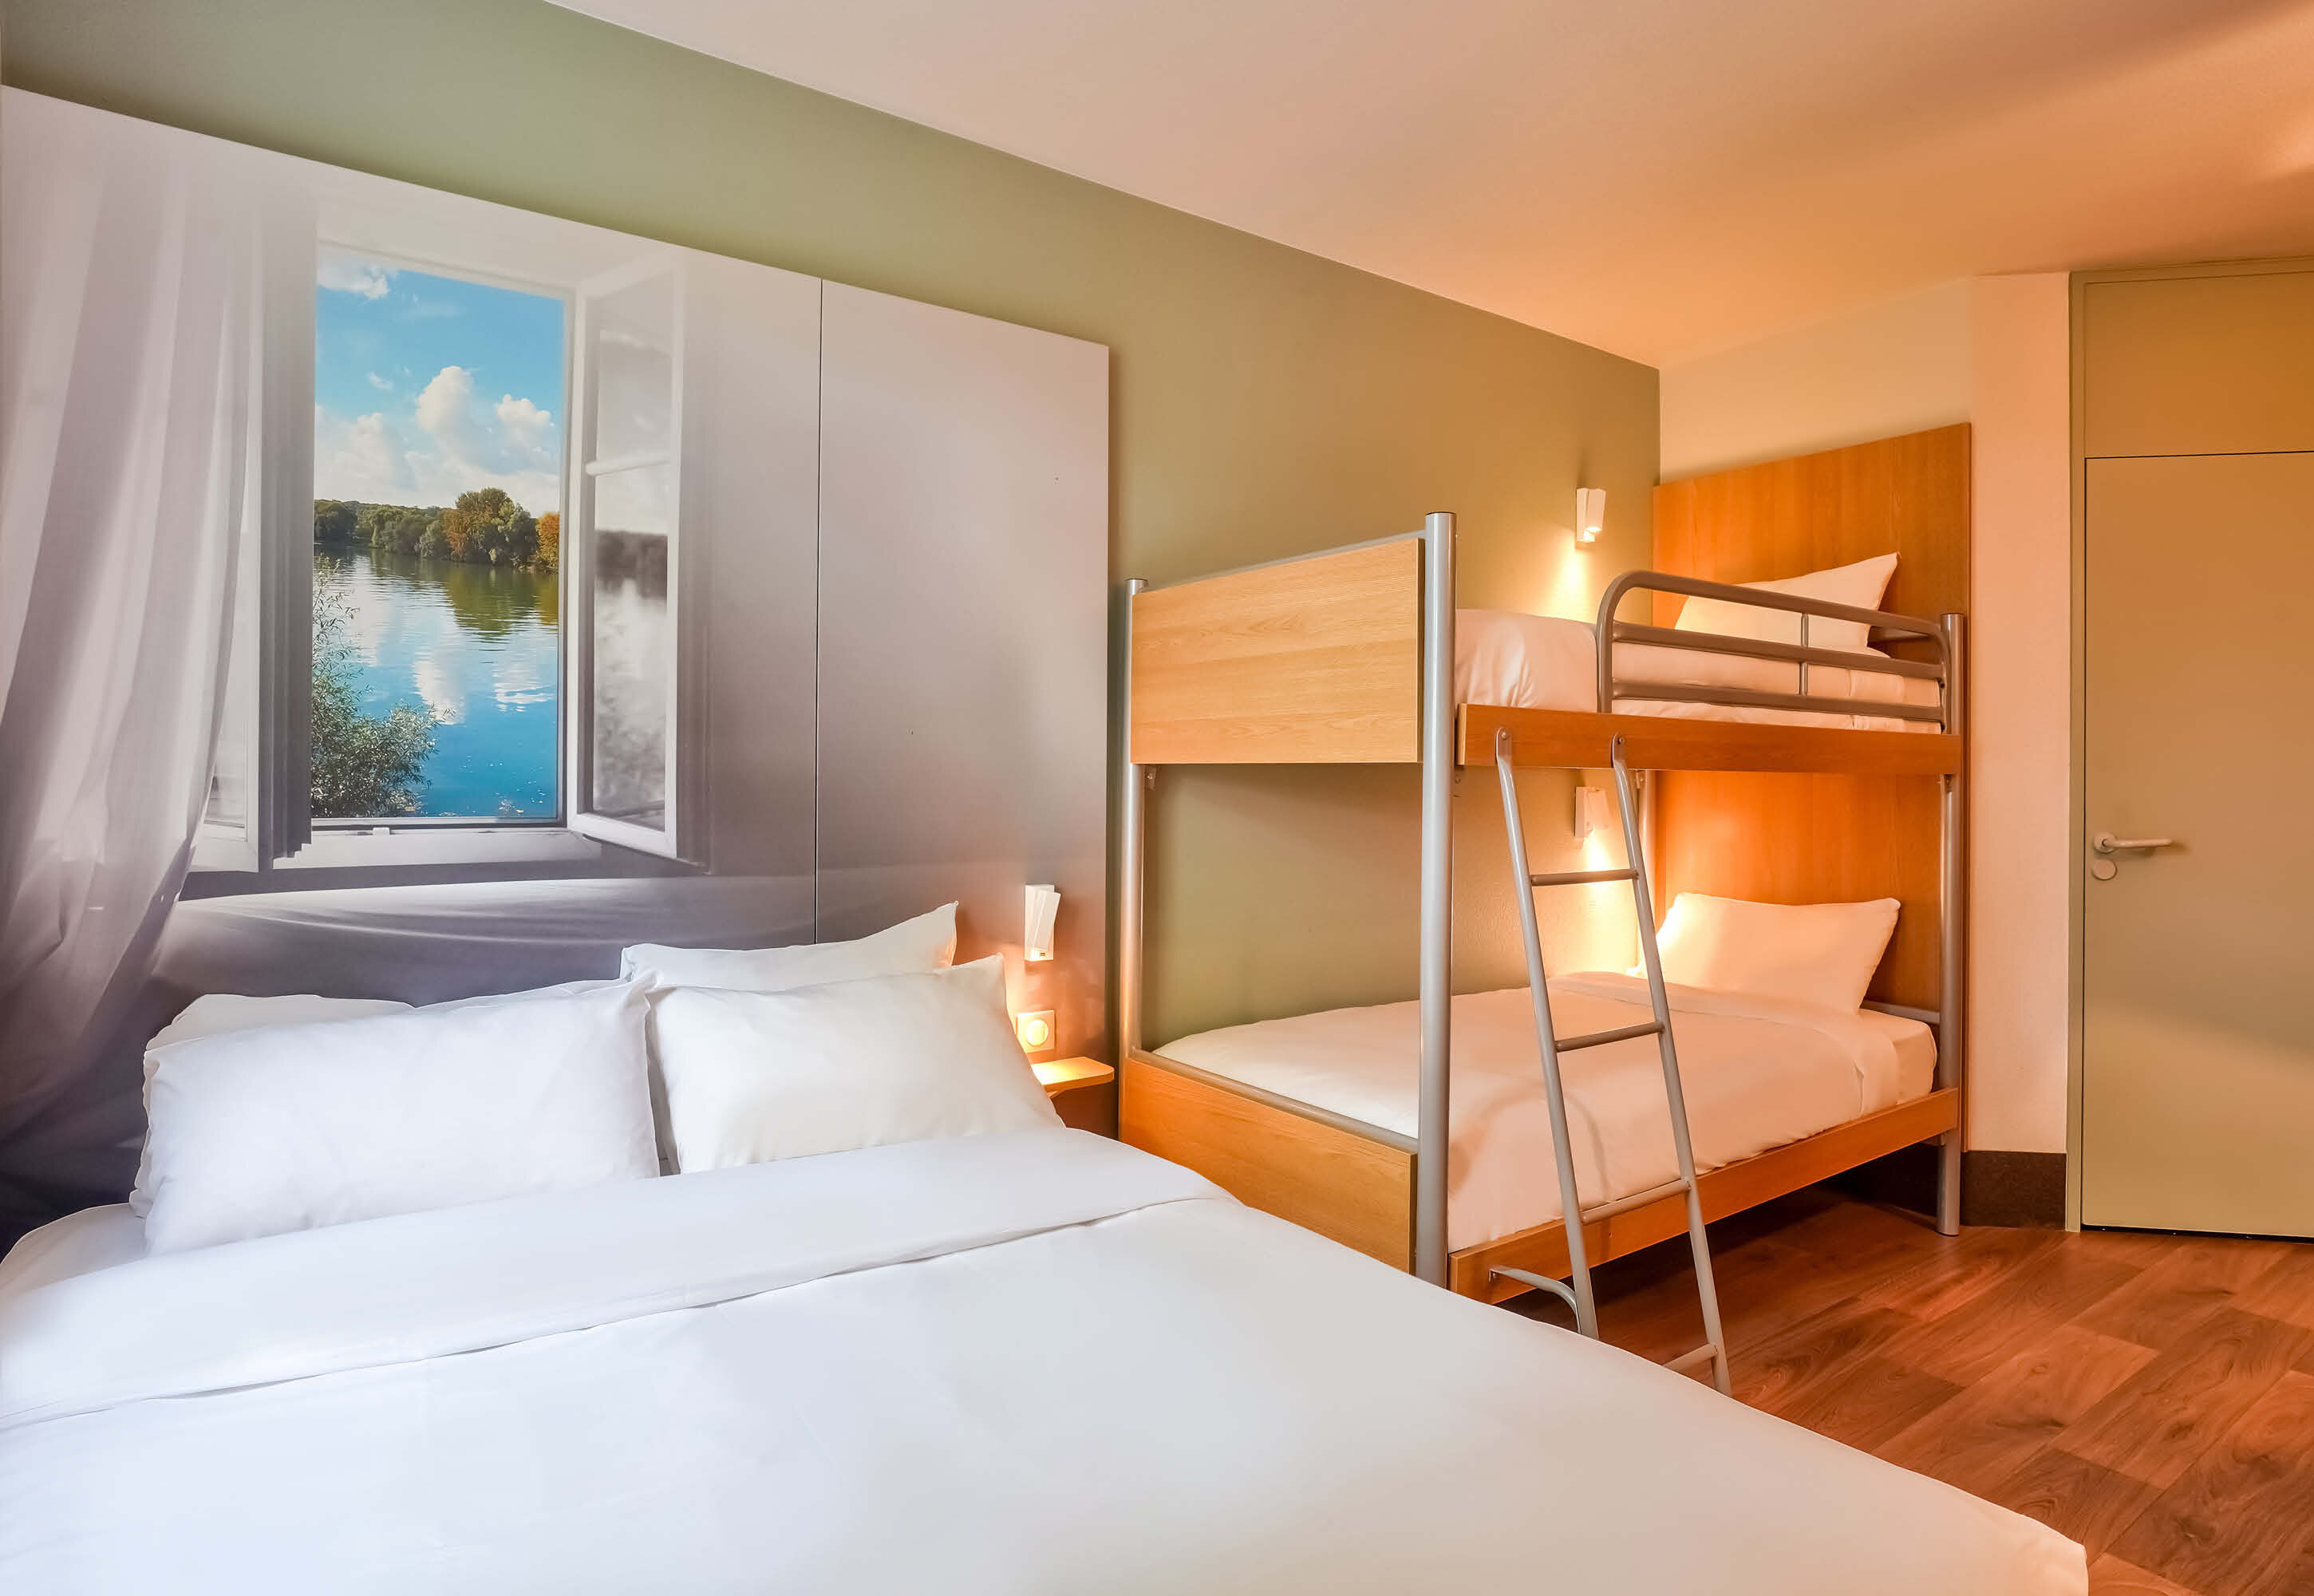 Images B&B HOTEL Goussainville CDG